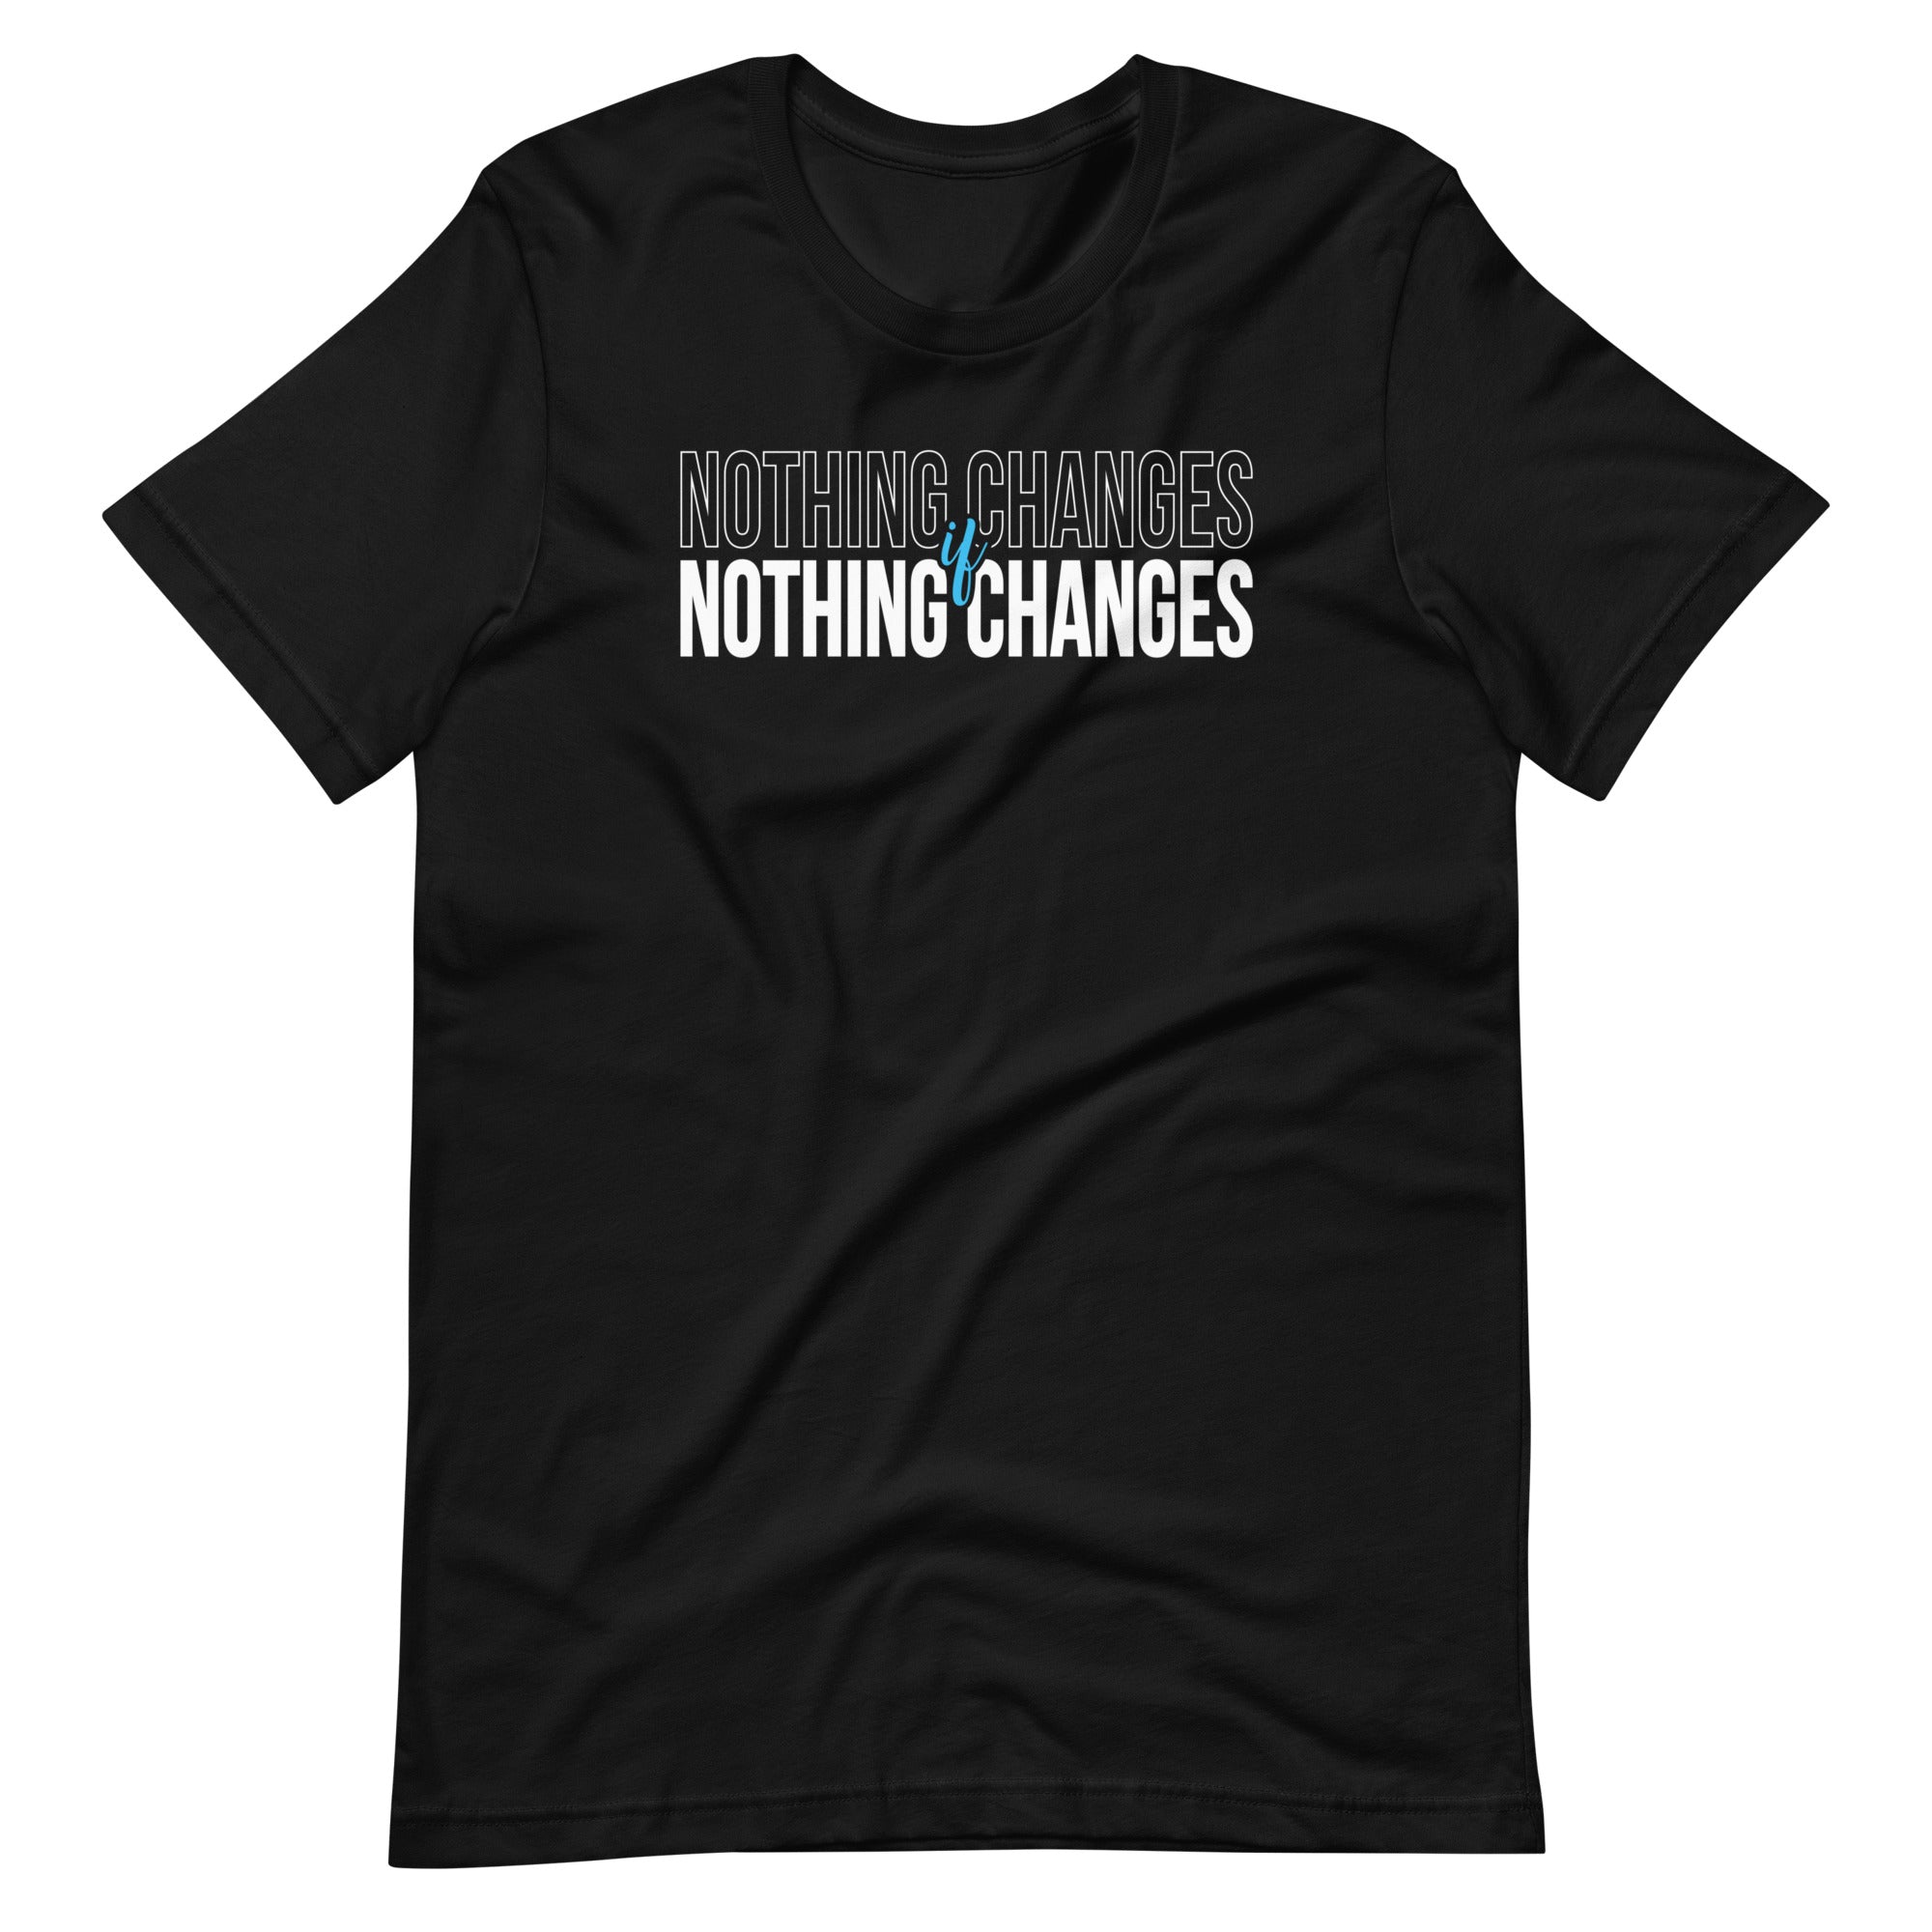 Mike Sorrentino Nothing Changes Shirt